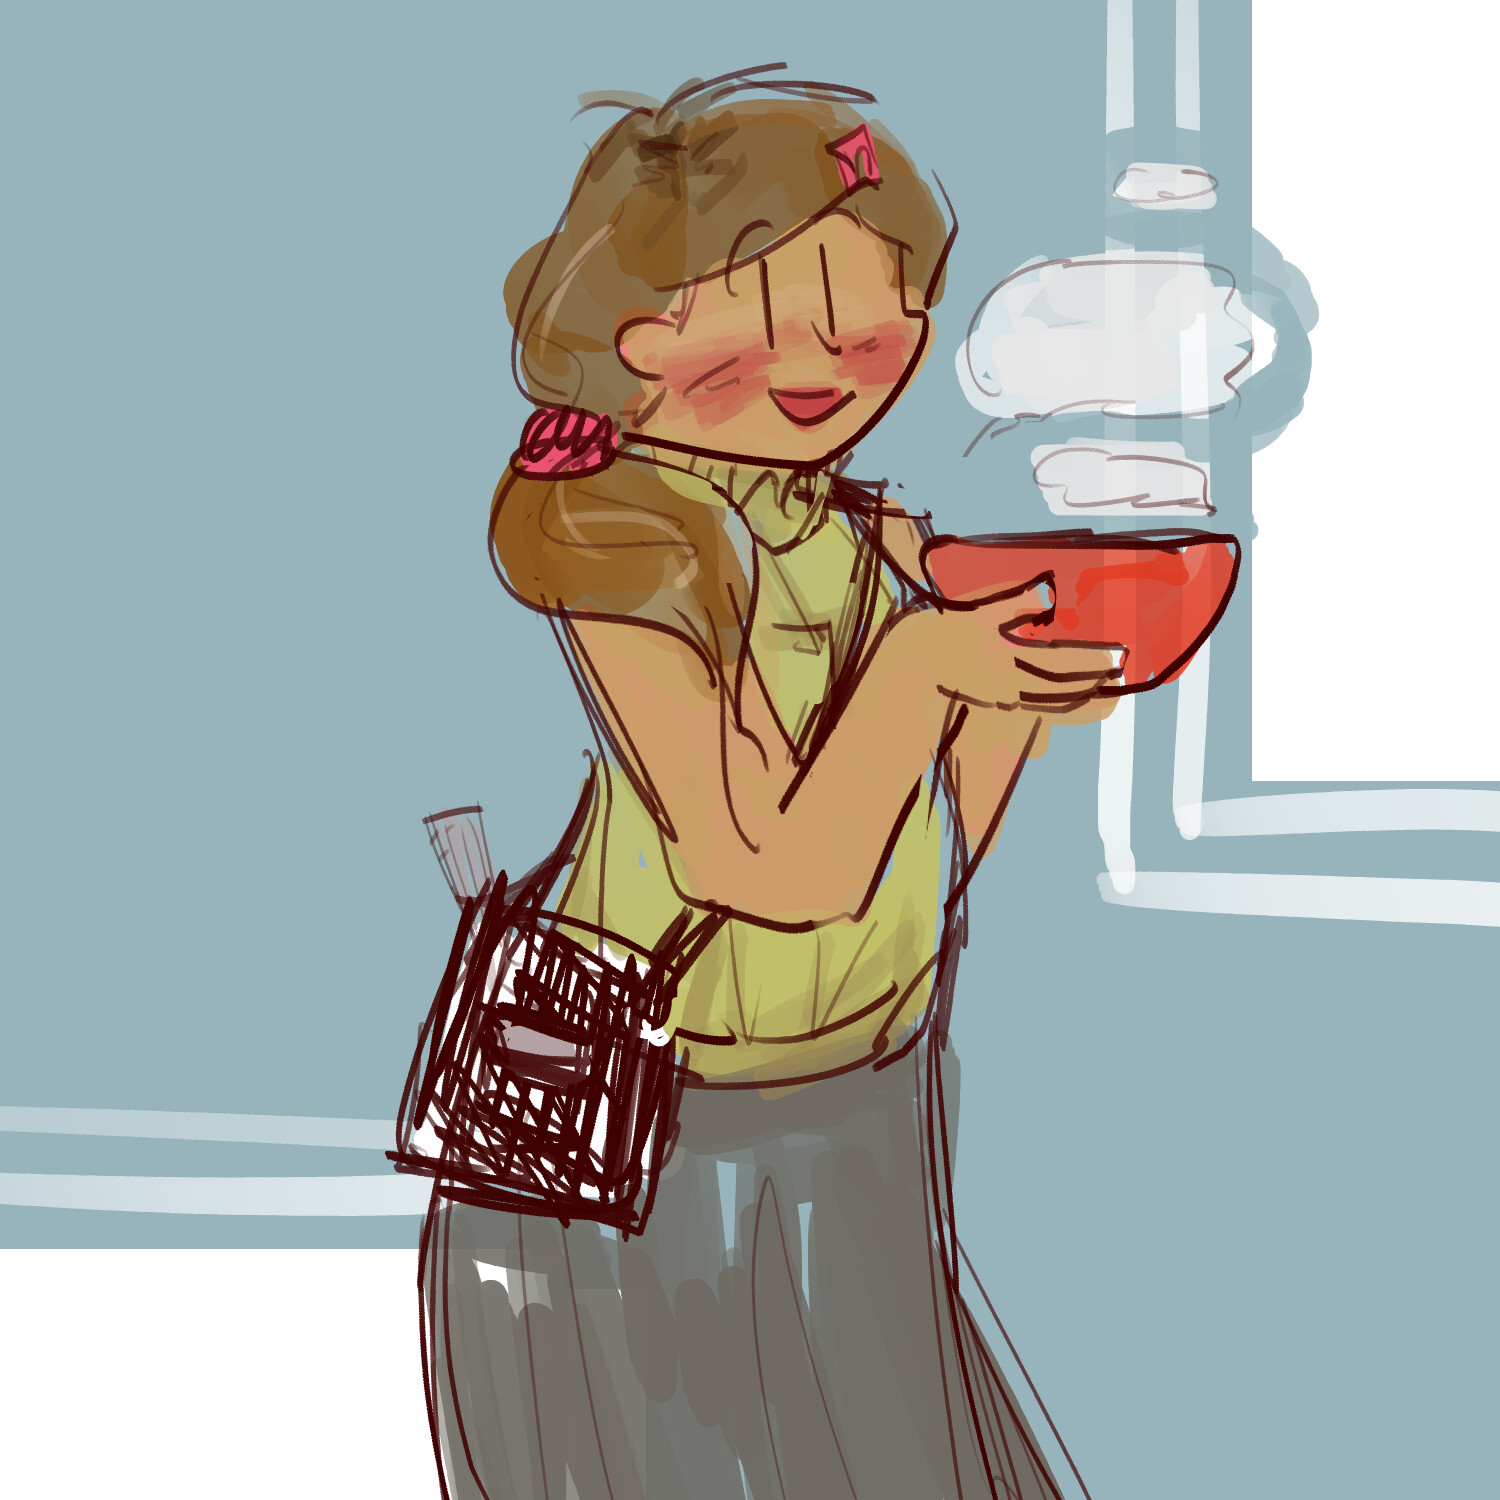 An older lady with steamy... food.